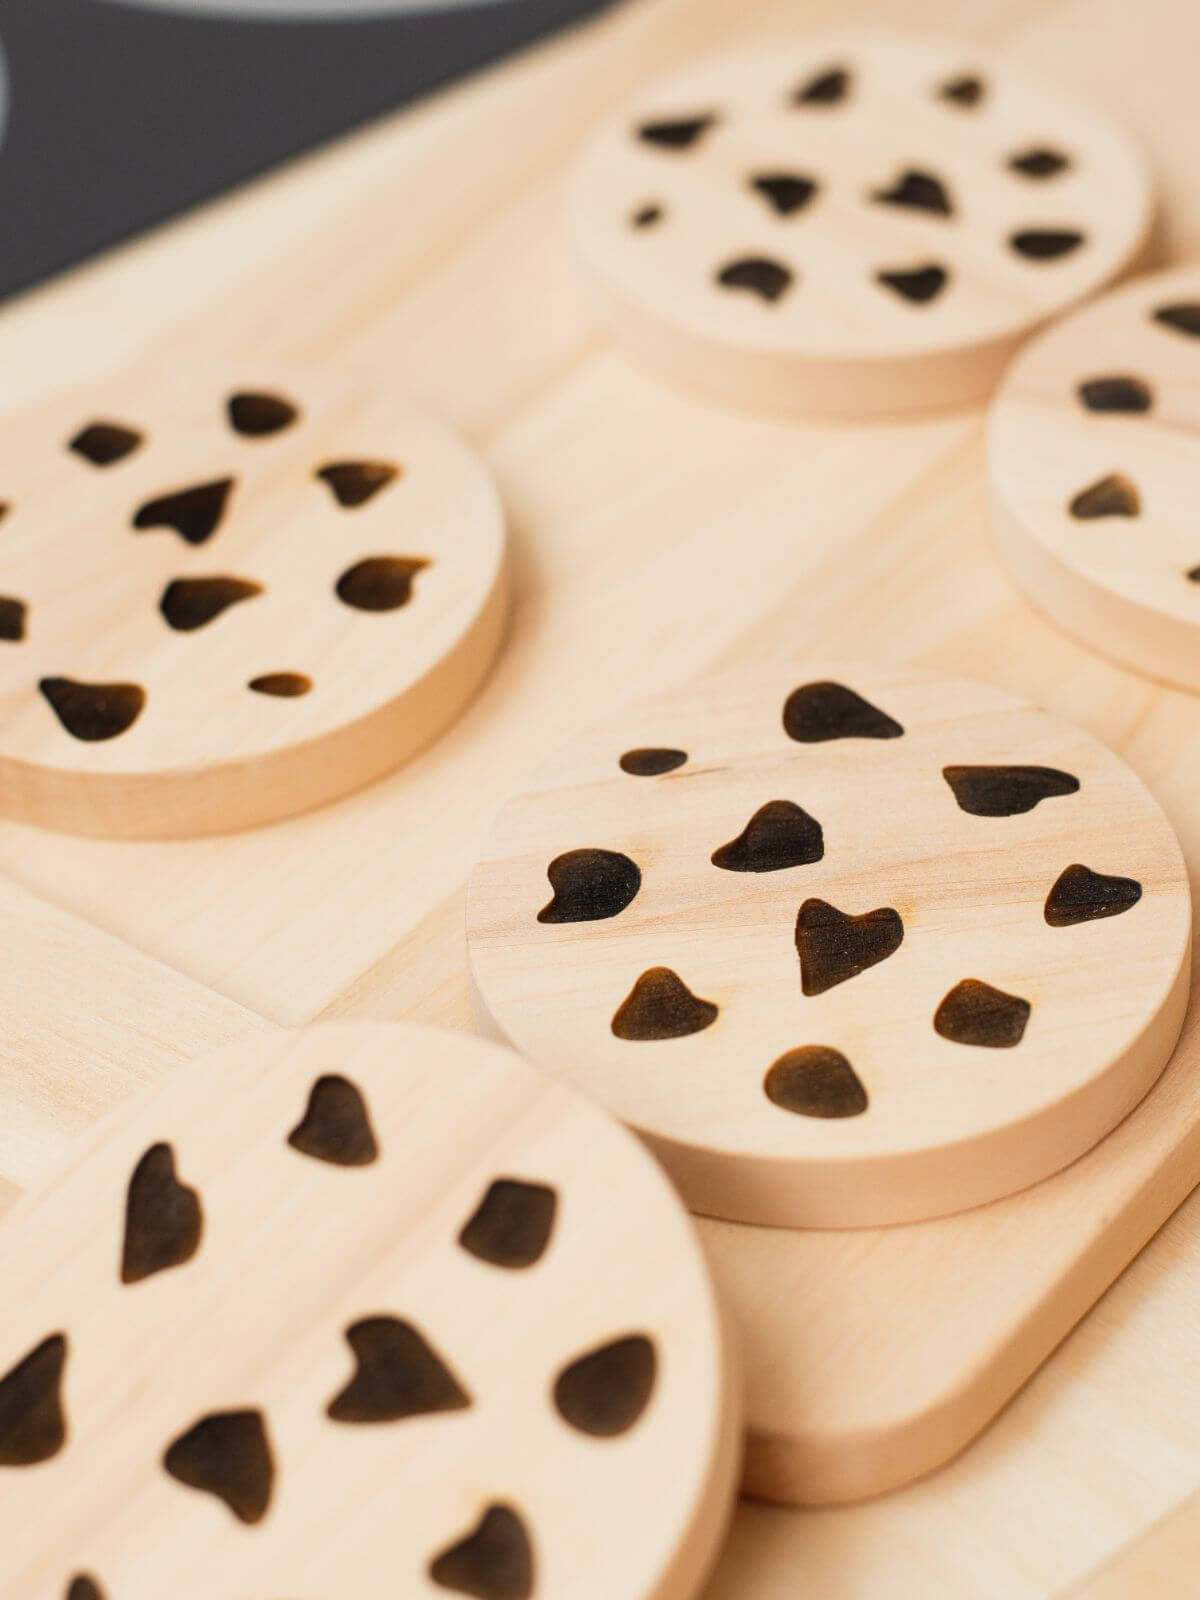  cooking toys on wood